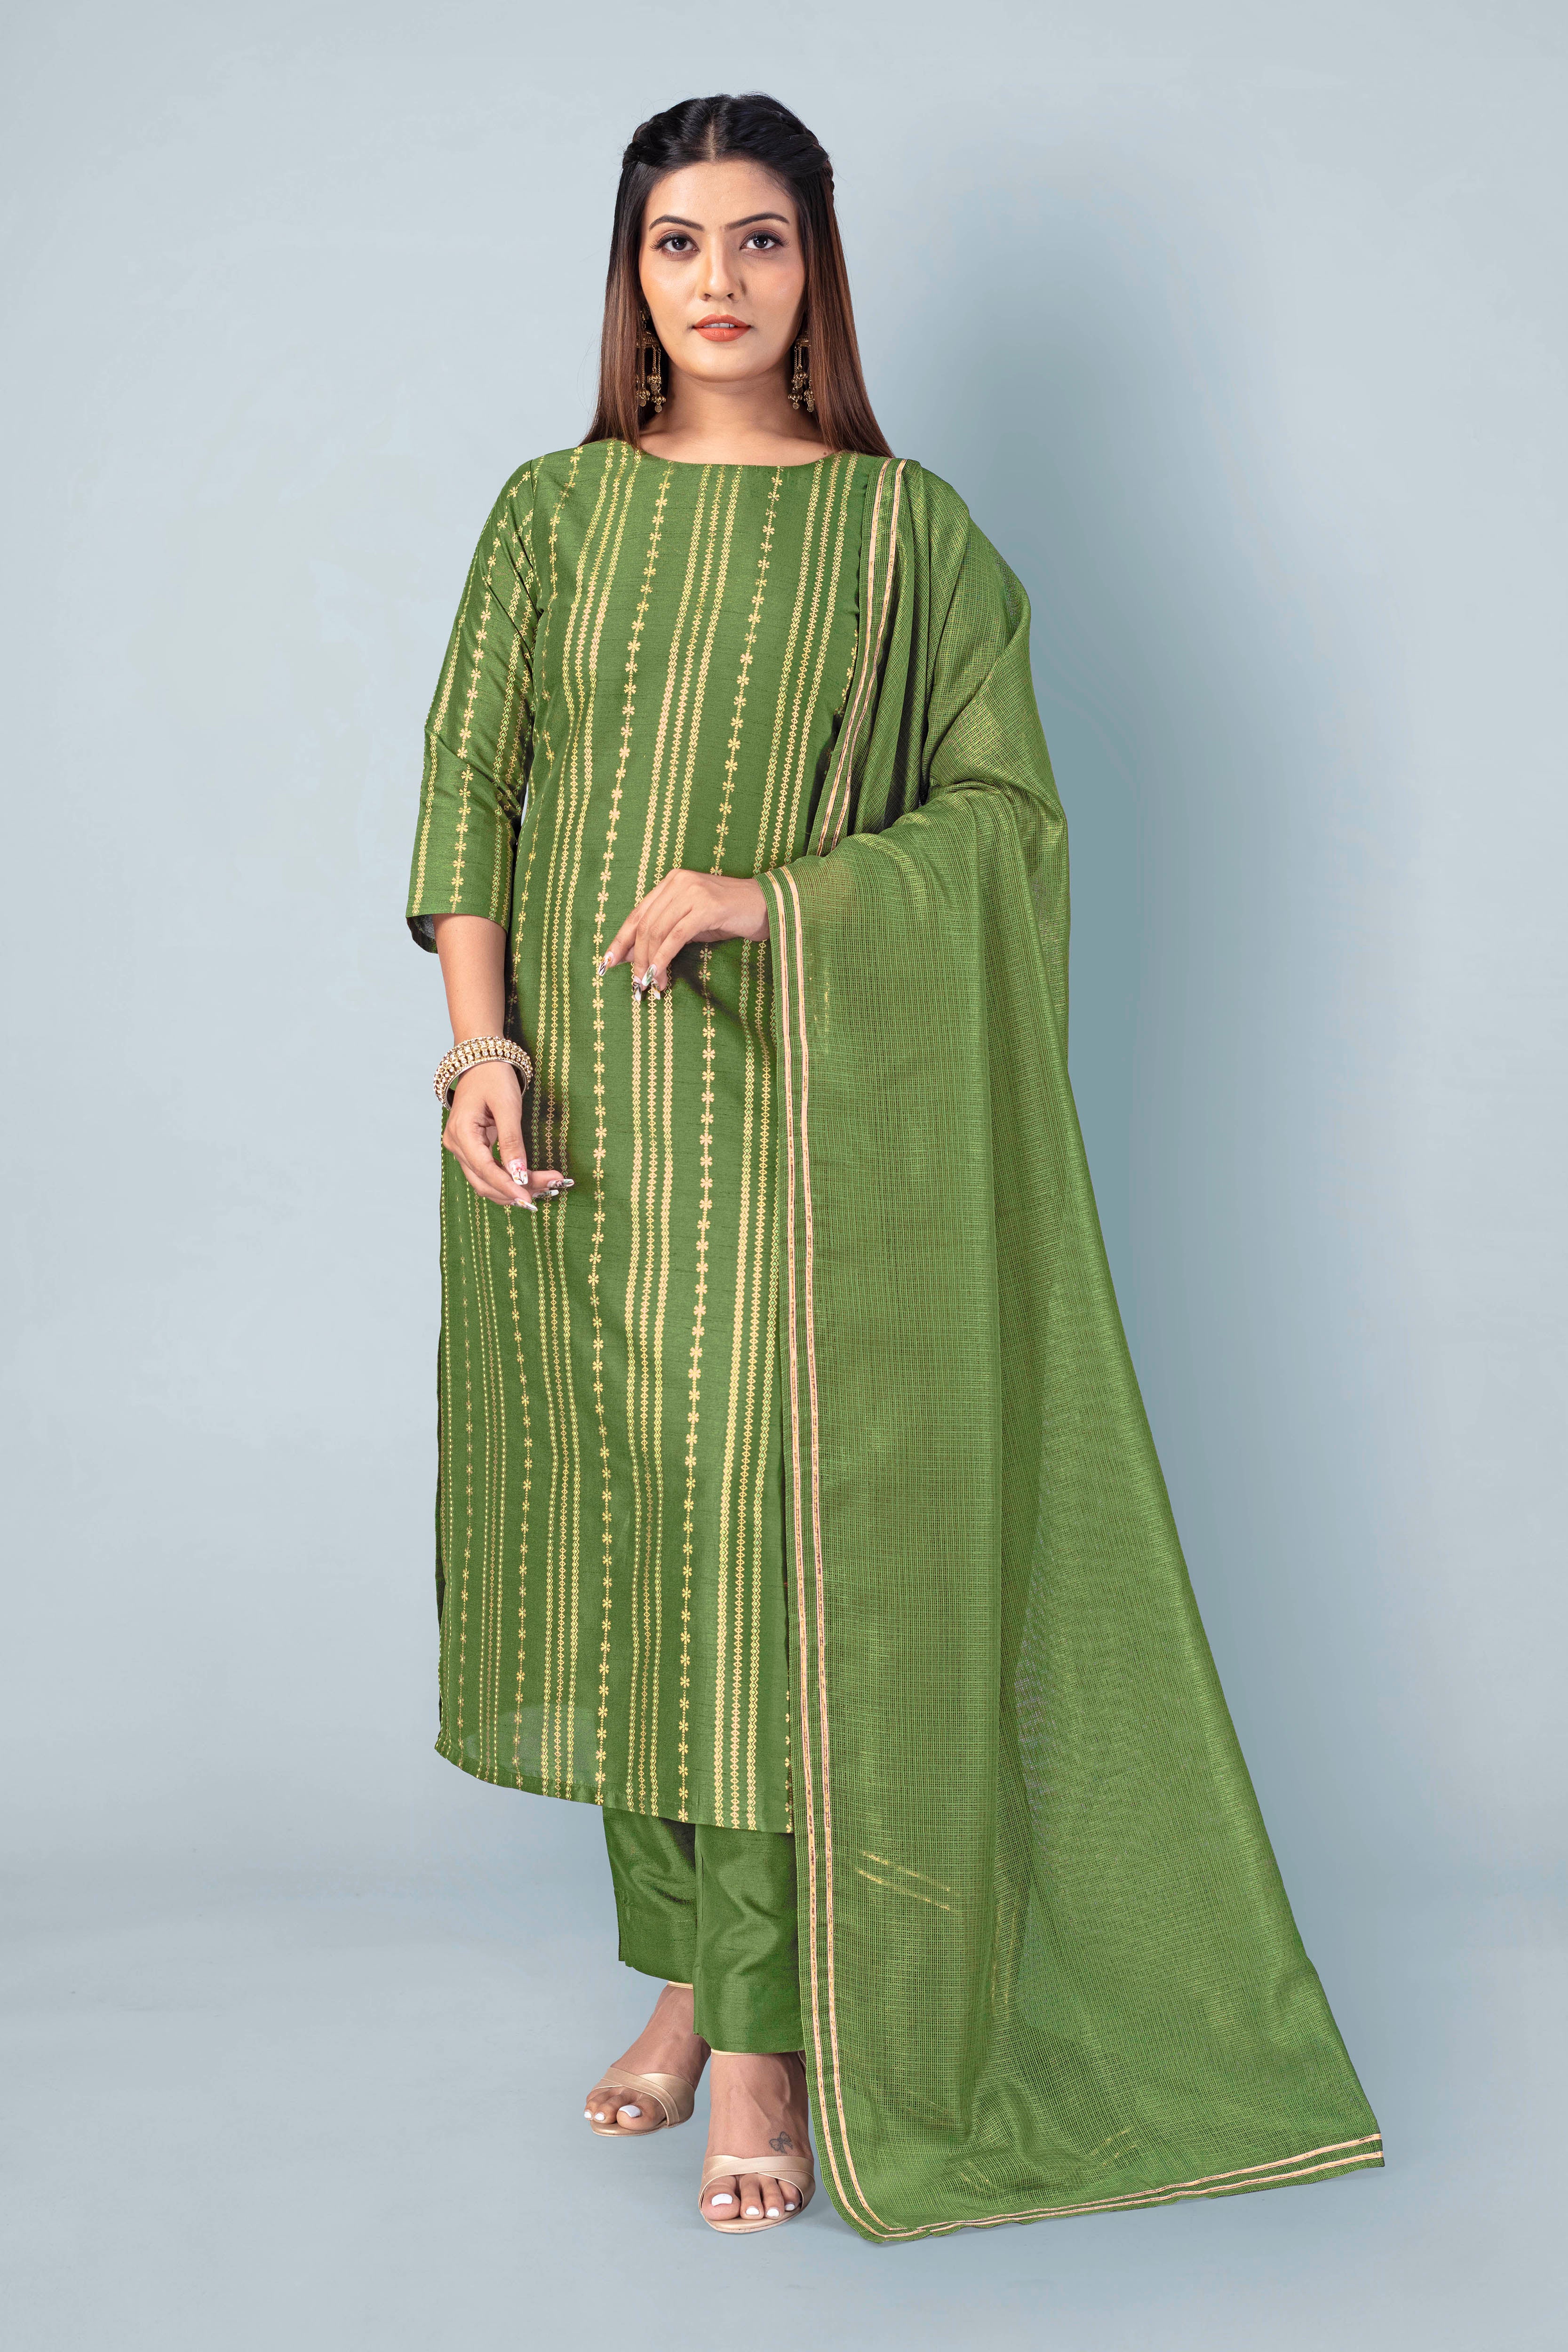 Discover more than 279 green salwar suit womens latest